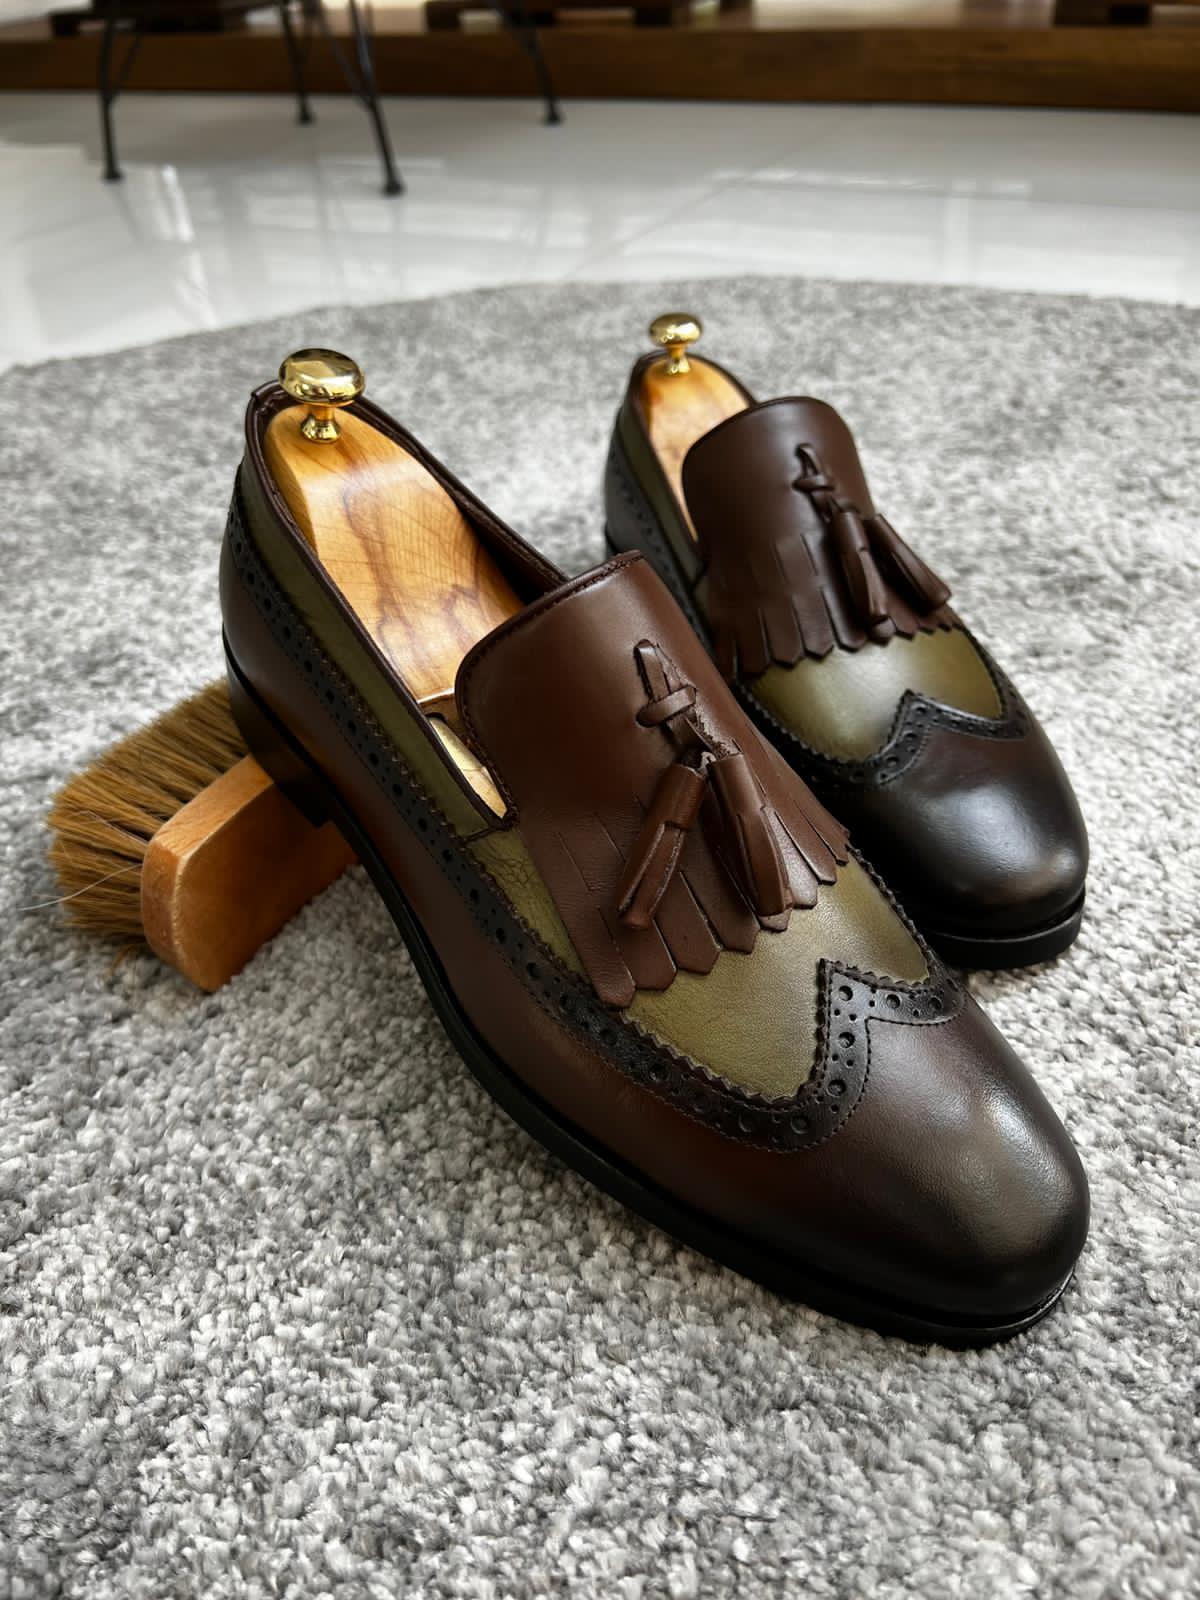 HolloShoe's brown and khaki tassel loafers, featuring 100% leather and neo-lite soles.